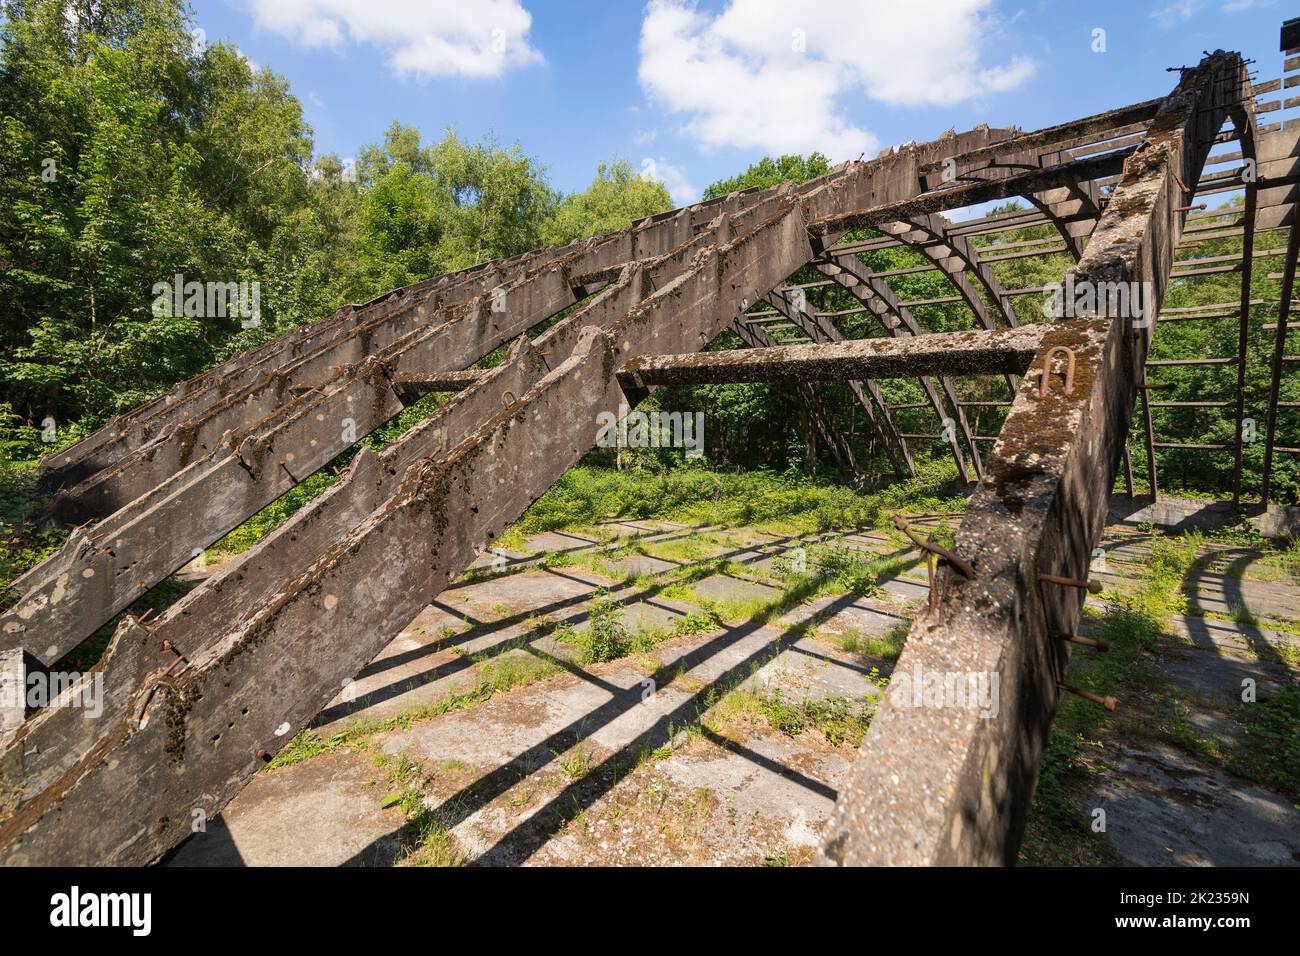 Remains of a hangar at the historical German military air field 'Fliegerhorst Venlo Herongen' near Venlo, bombed by allied forces in 1944, Germany Stock Photo